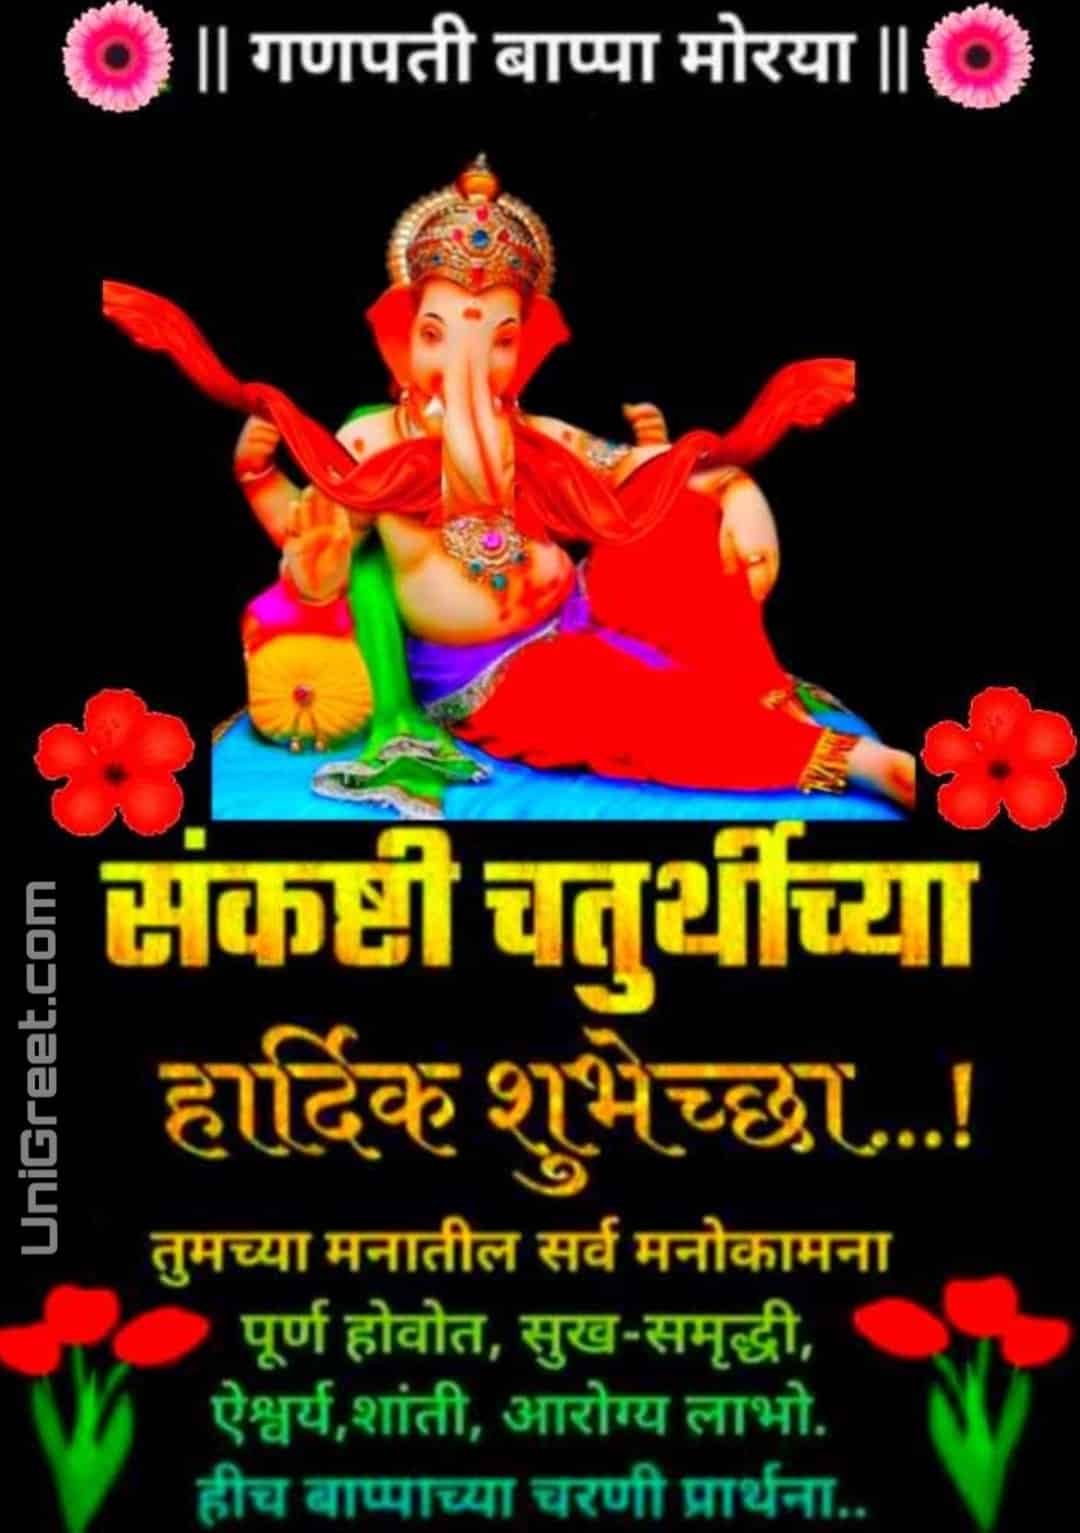 Best Sankashti Chaturthi Special Status Quotes Wishes Images Banner Background In Marathi Unigreet Our ganpati temple has been closed for the past several days due to corona virus. best sankashti chaturthi special status